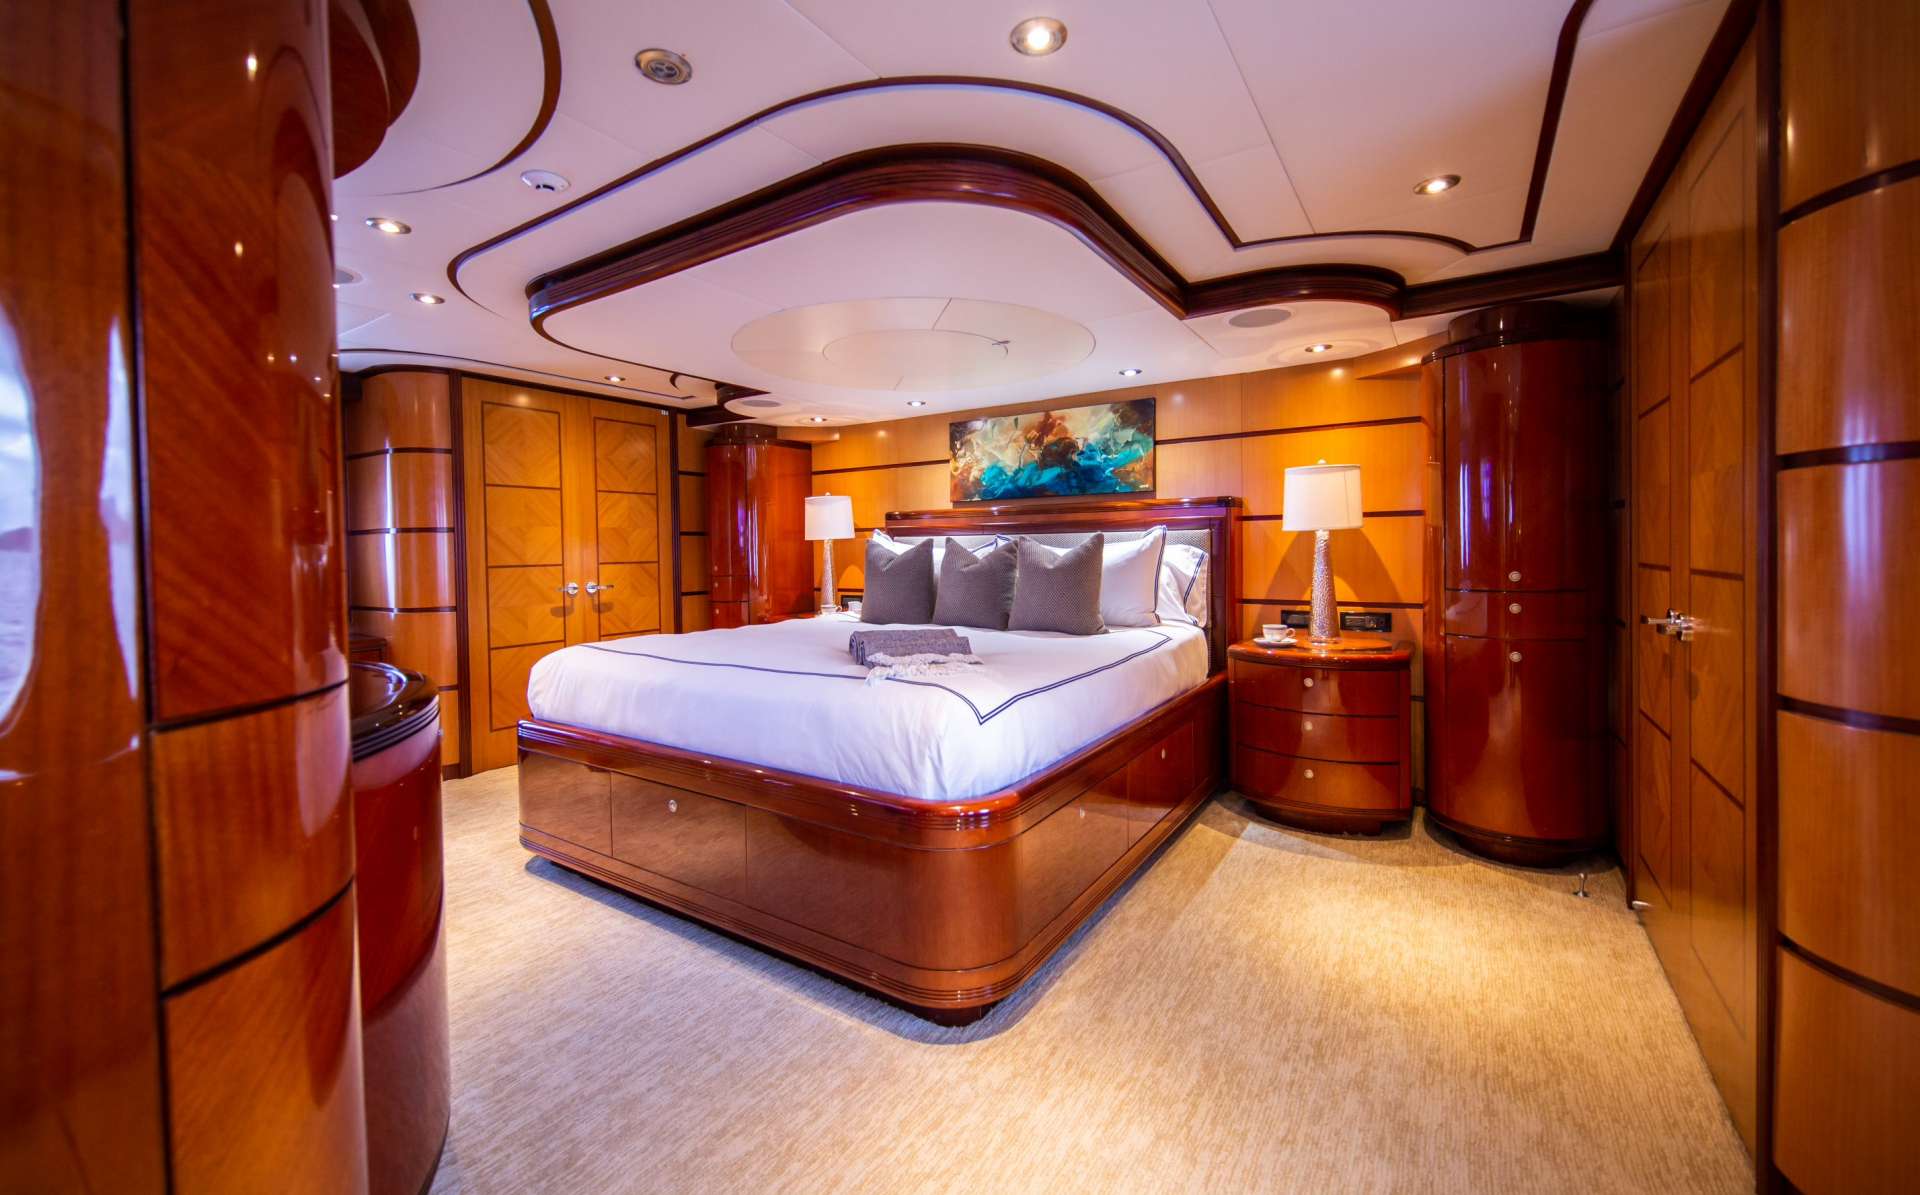 Motor Yacht 'JUST ENOUGH' Master Stateroom, 11 PAX, 9 Crew, 141.00 Ft, 43.00 Meters, Built 2012, ., Refit Year 2018